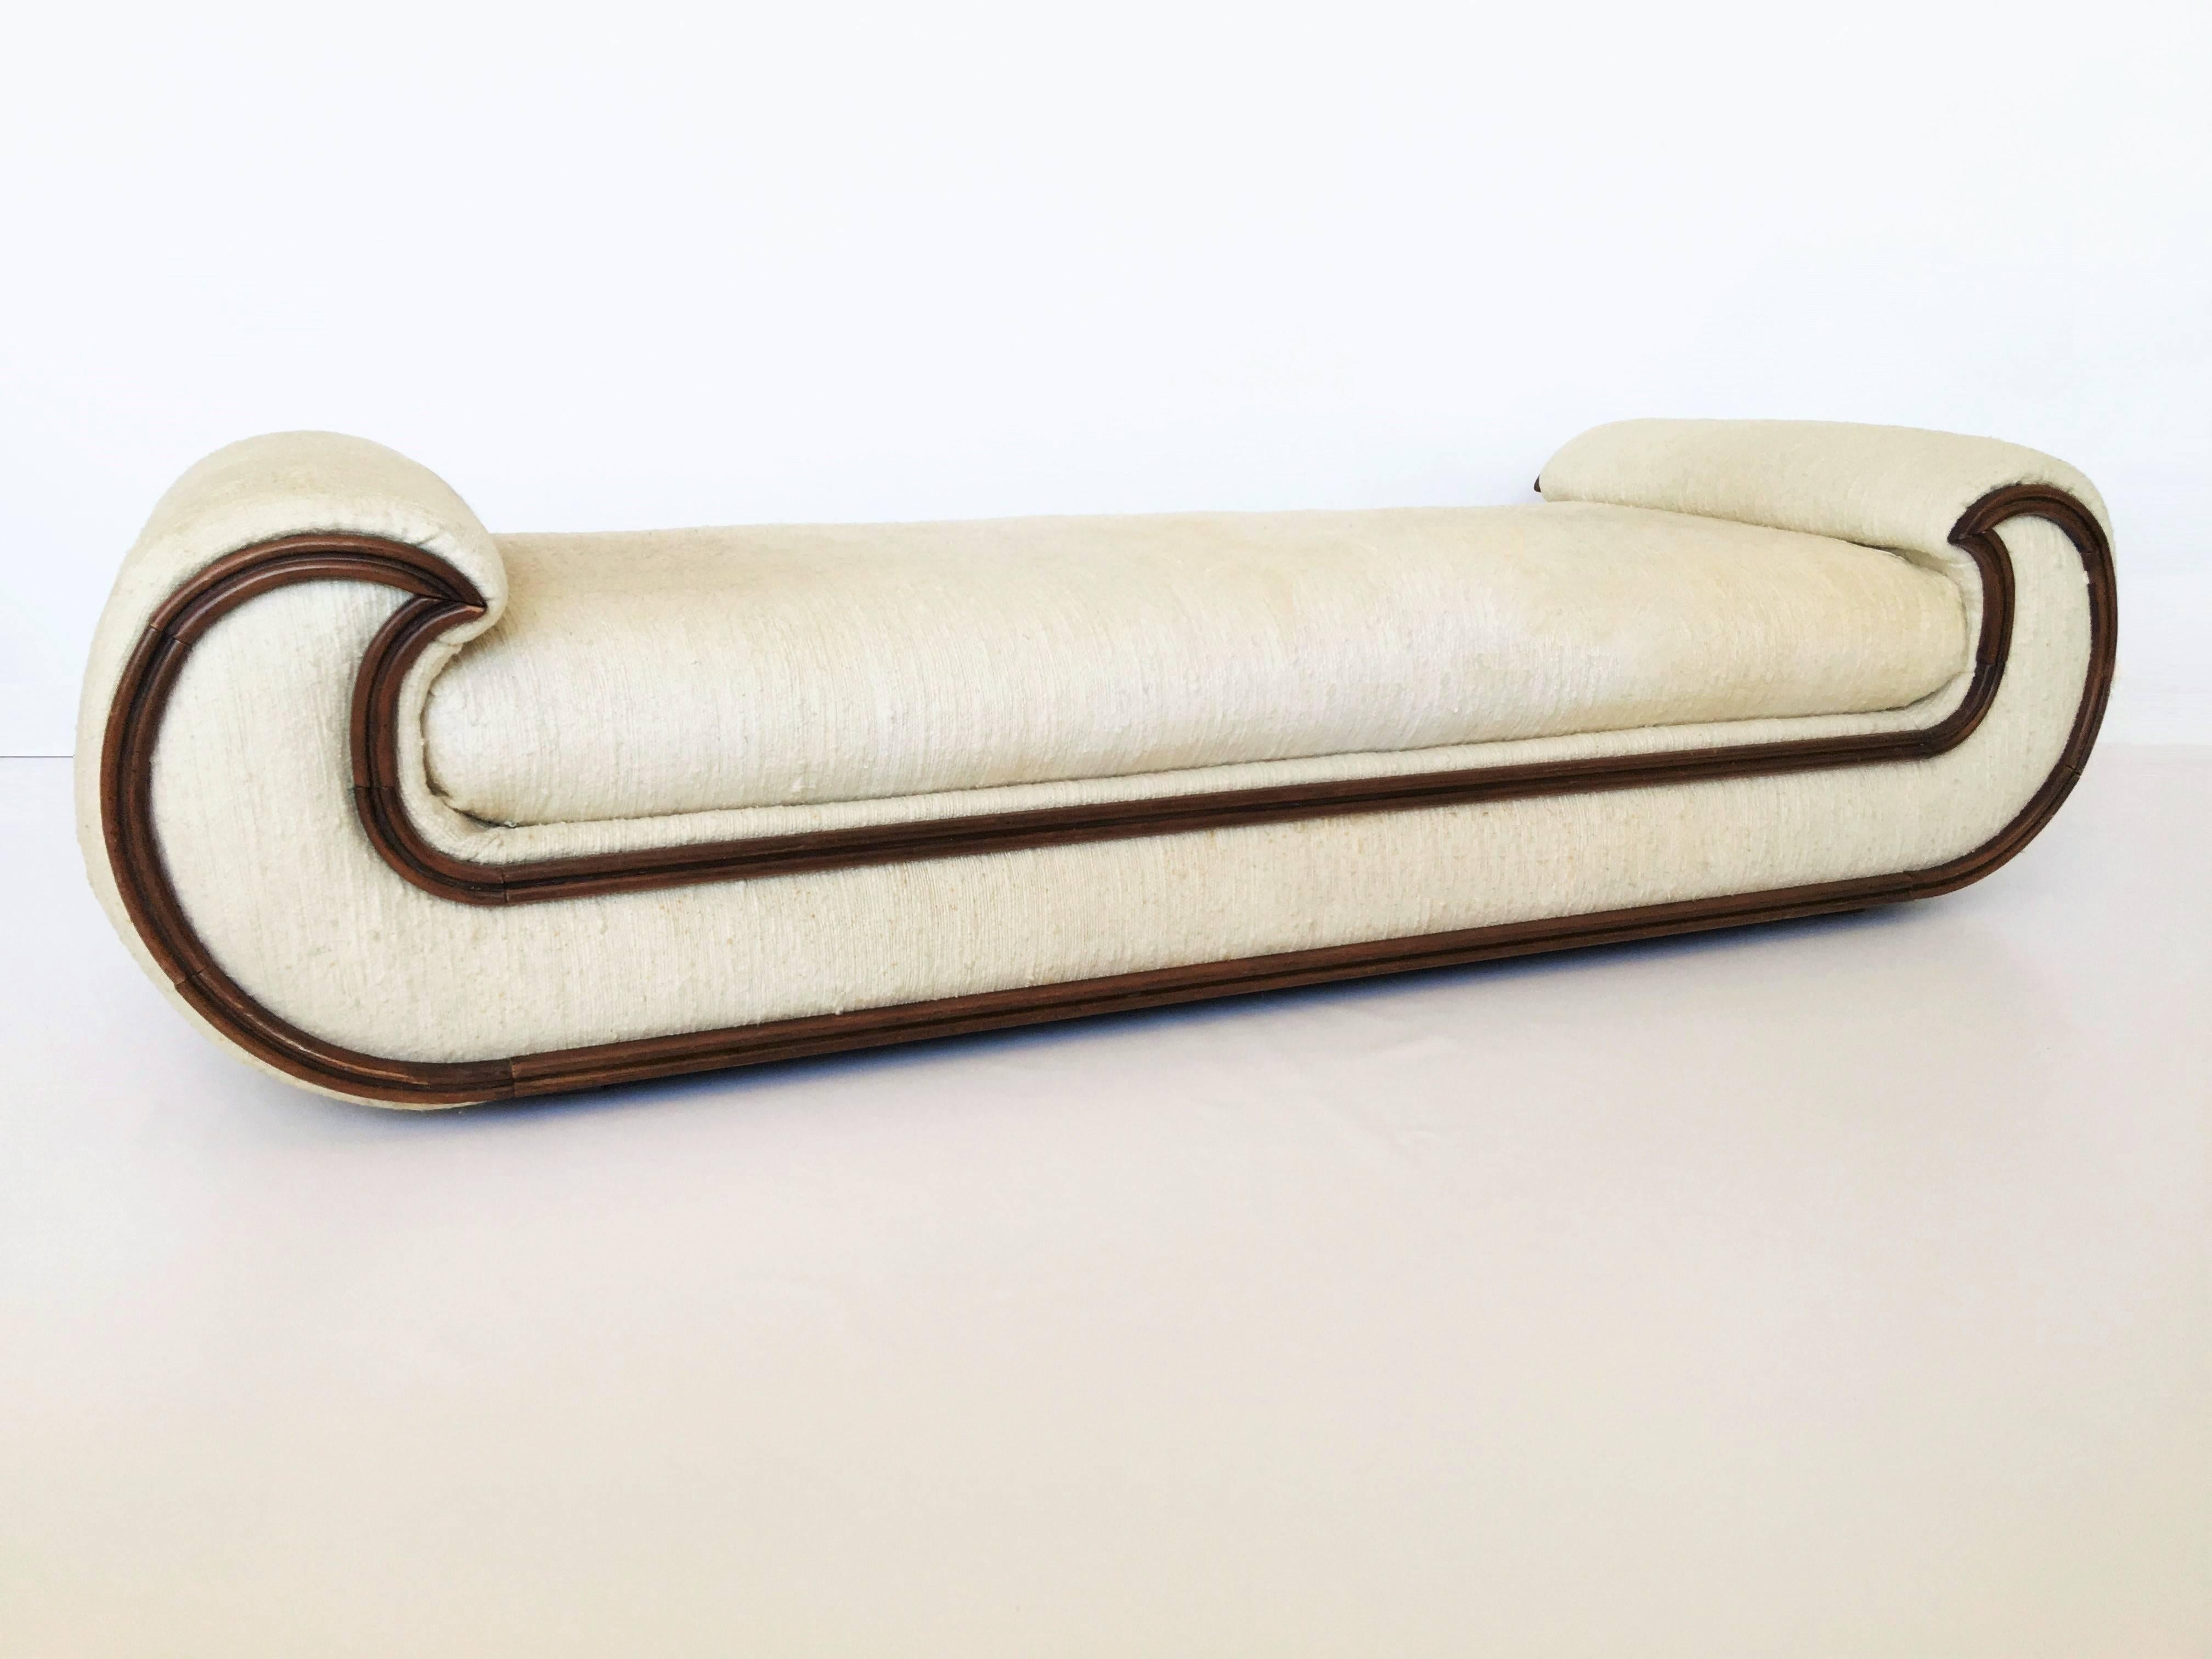 European 1970's Chaise Lounge or Daybed by Vivai del Sud, Italy